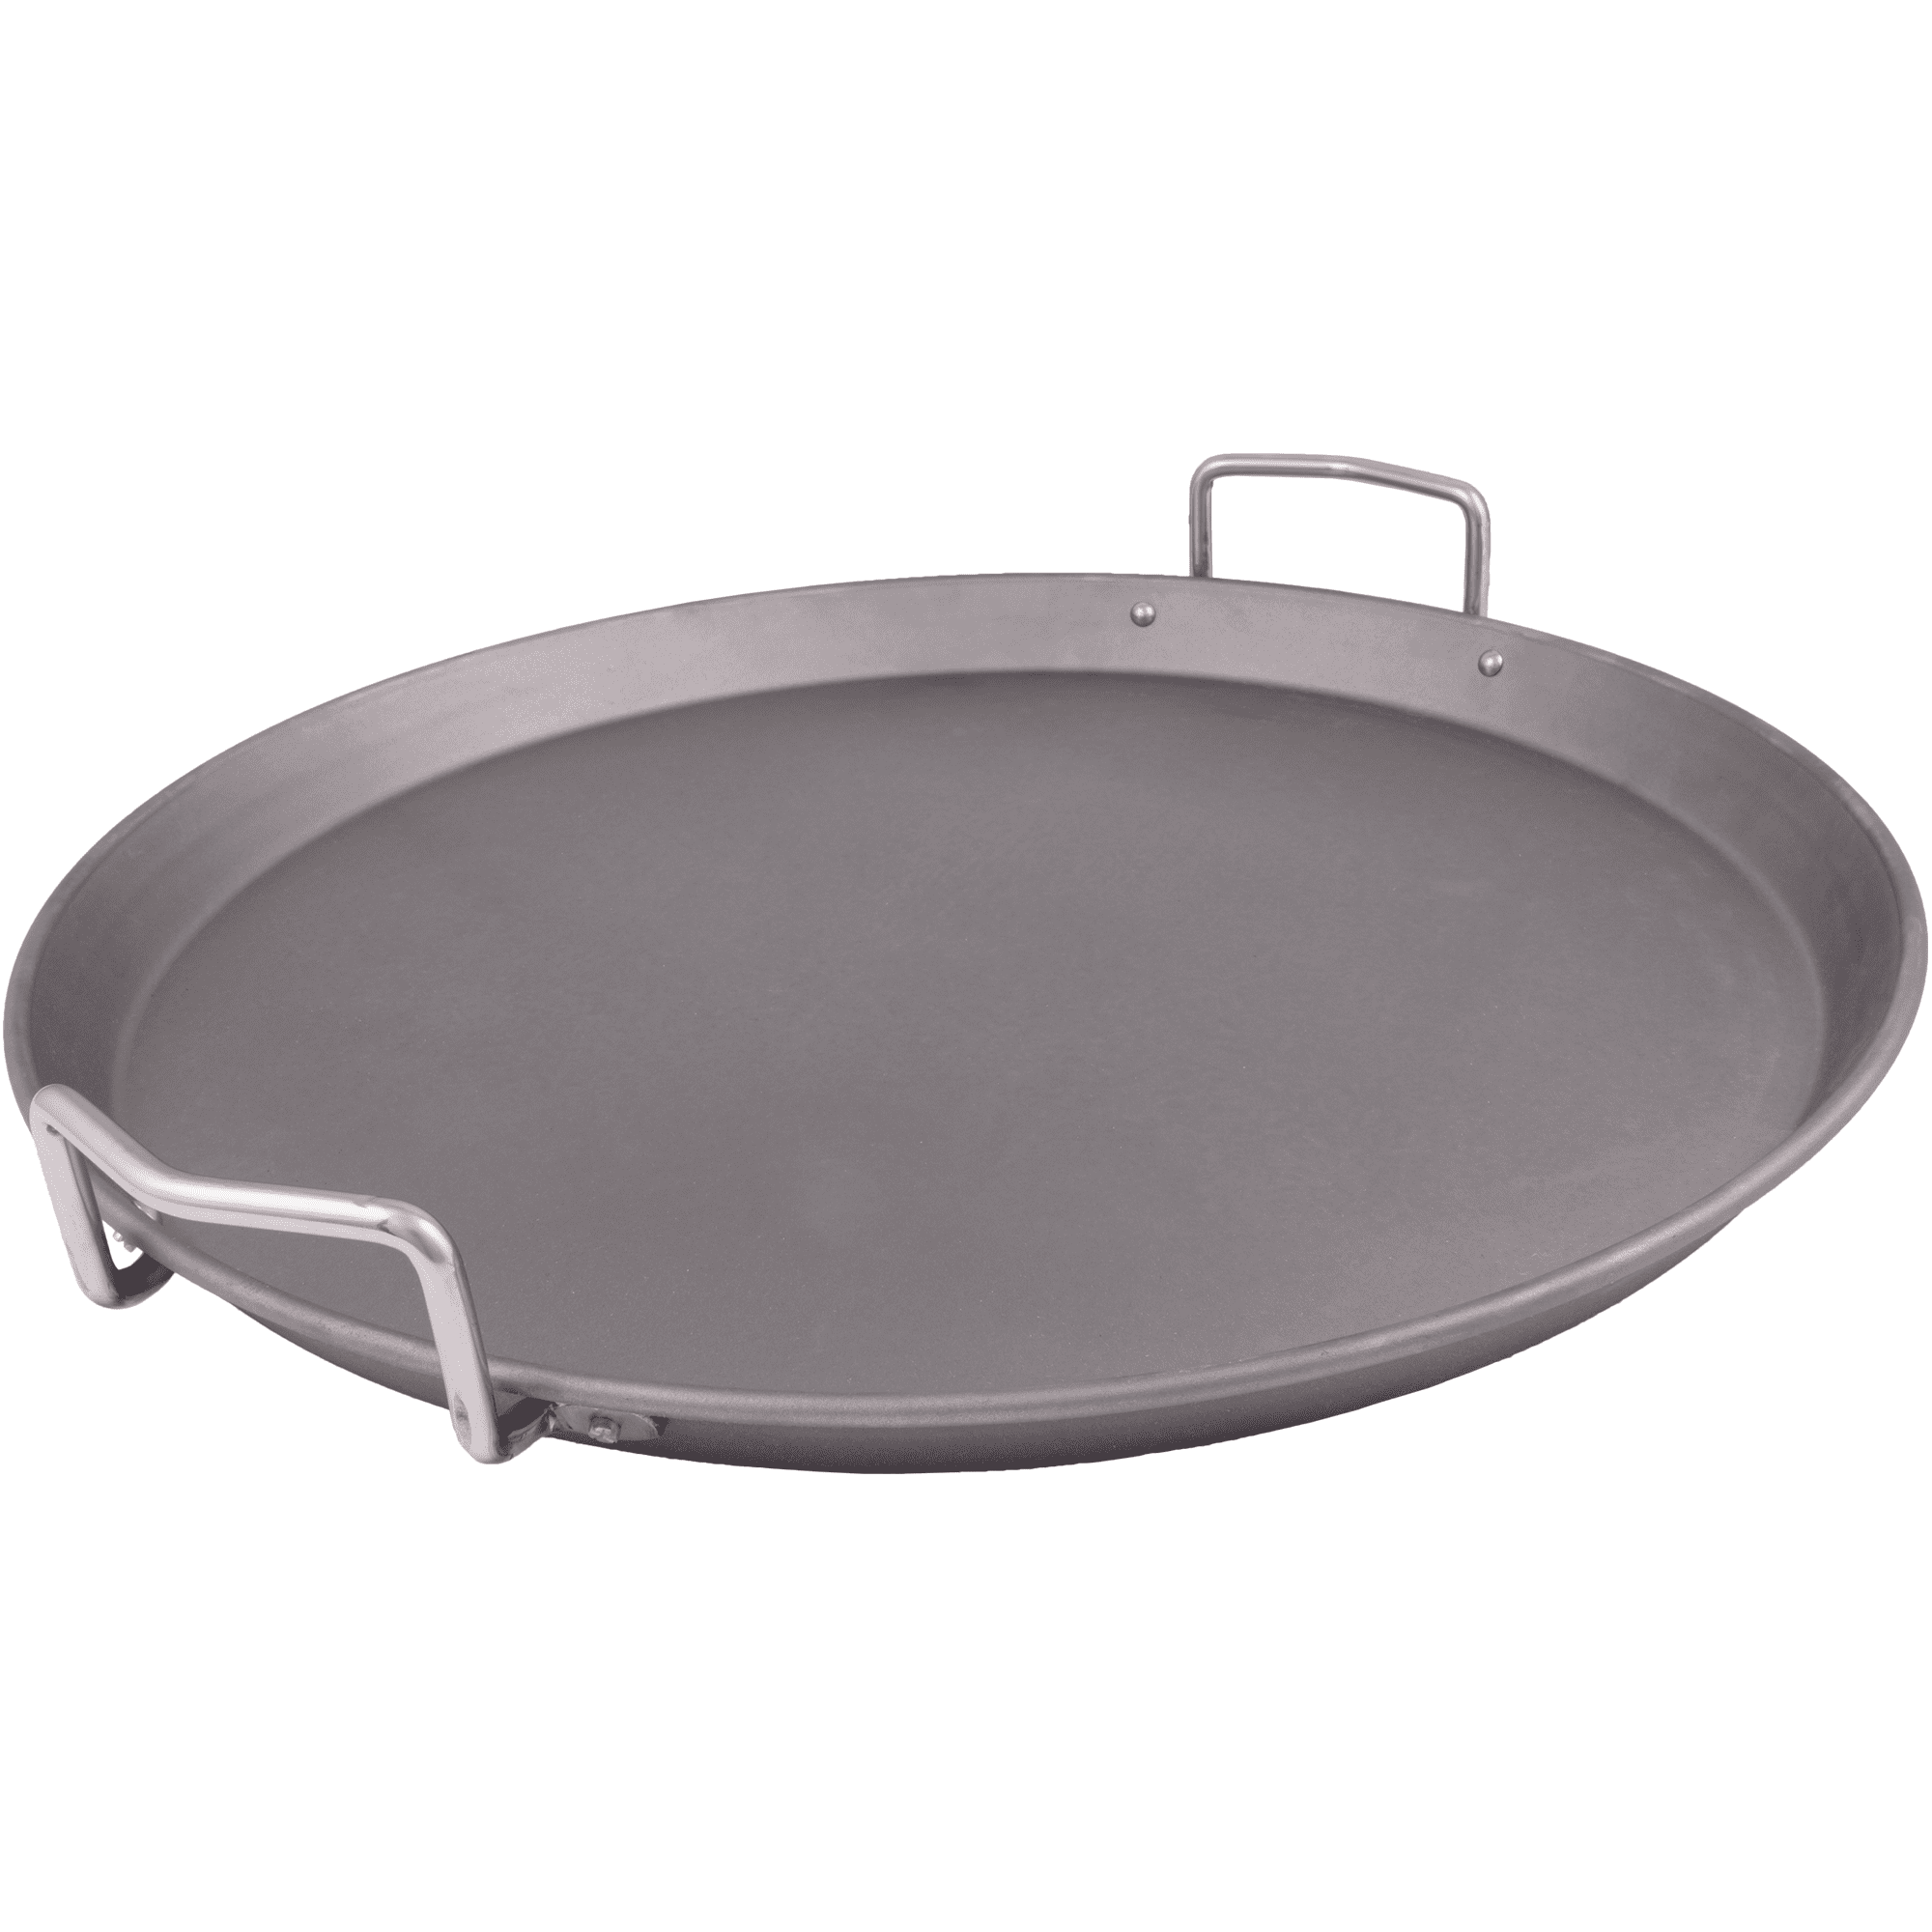 Primo Kamado Ceramic Grill Fire Bottom Charcoal Grate Cast Iron Round 9" 